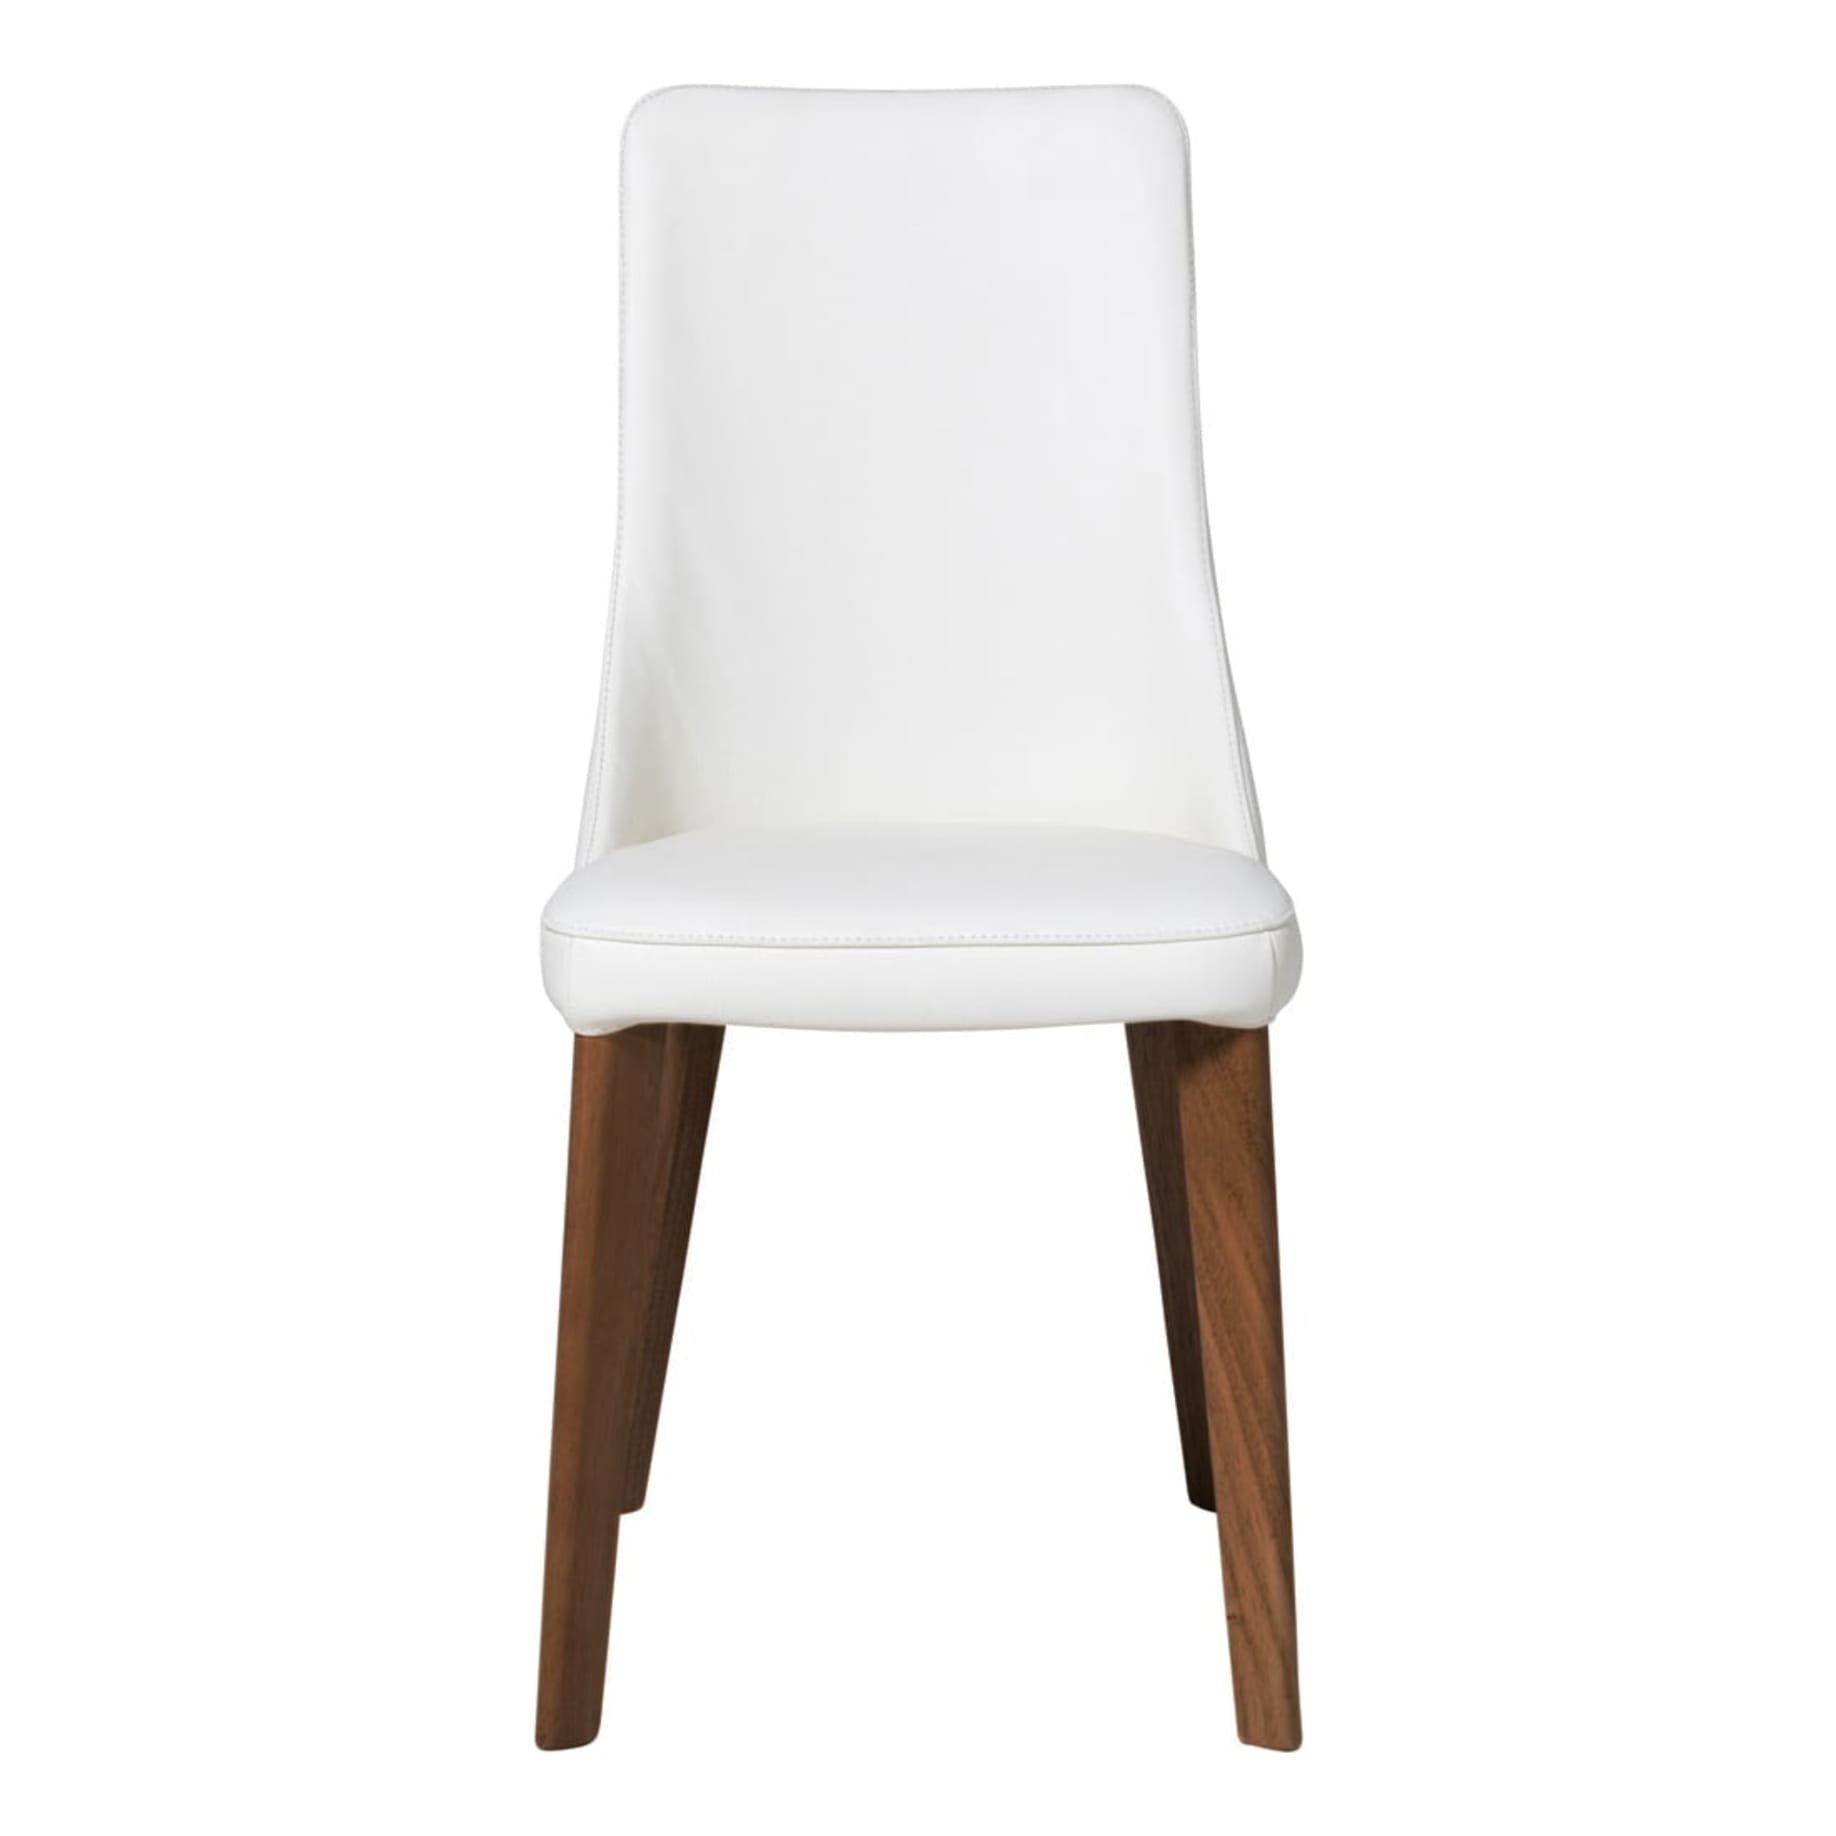 Panama Dining Chair in Pure White /Blackwood Stain